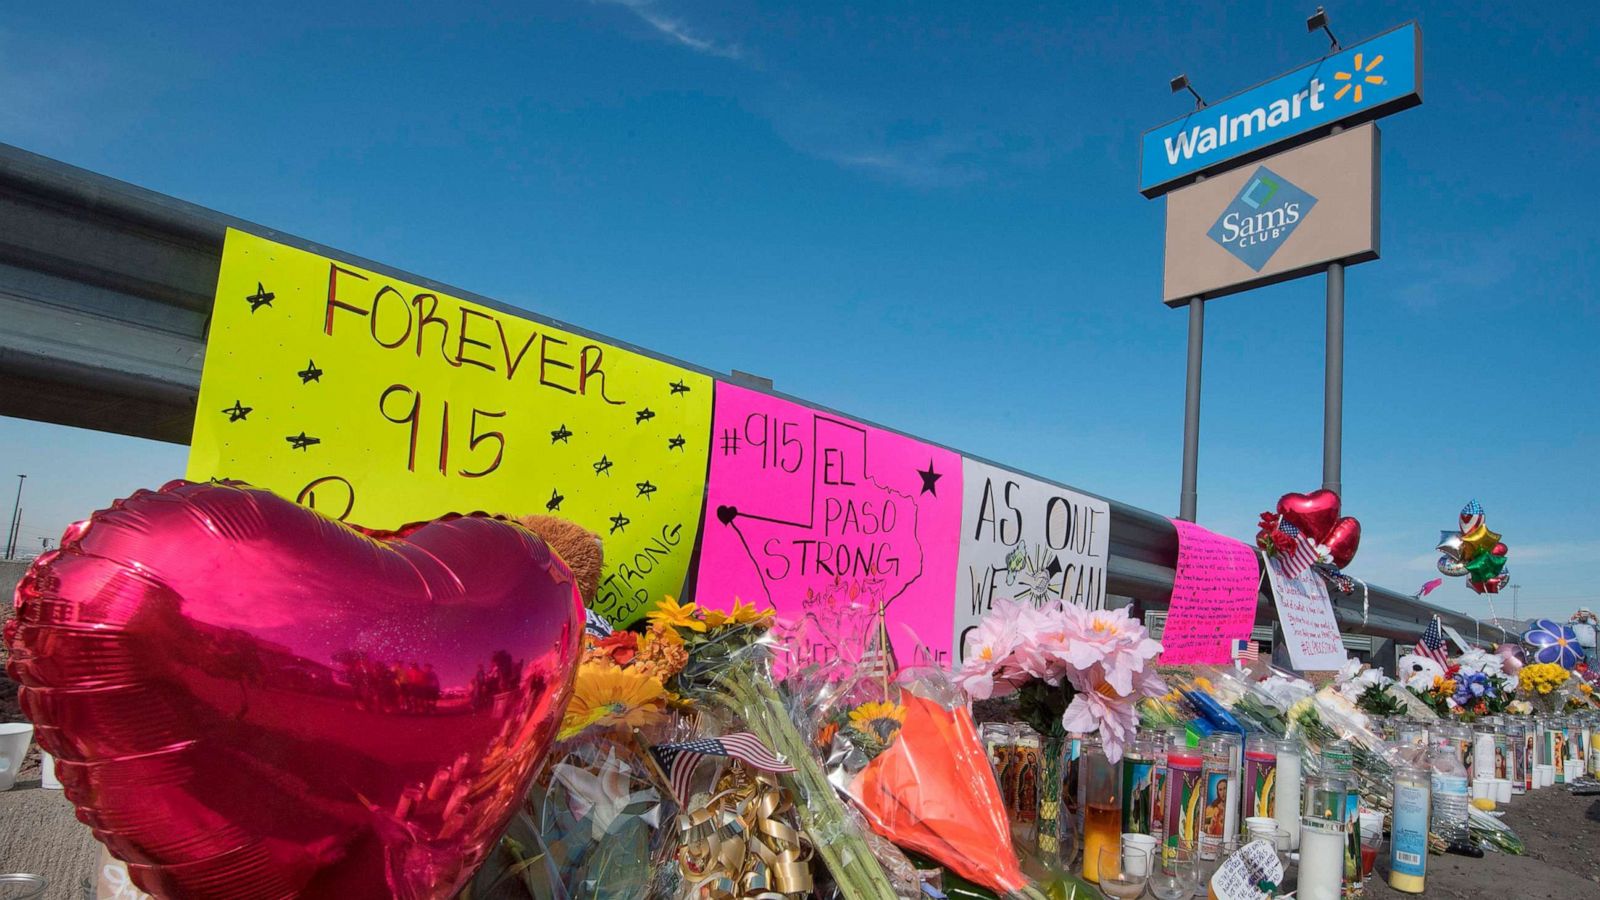 Alleged shooter cased El Paso Walmart before rampage that killed 22: Law  enforcement officials - ABC News